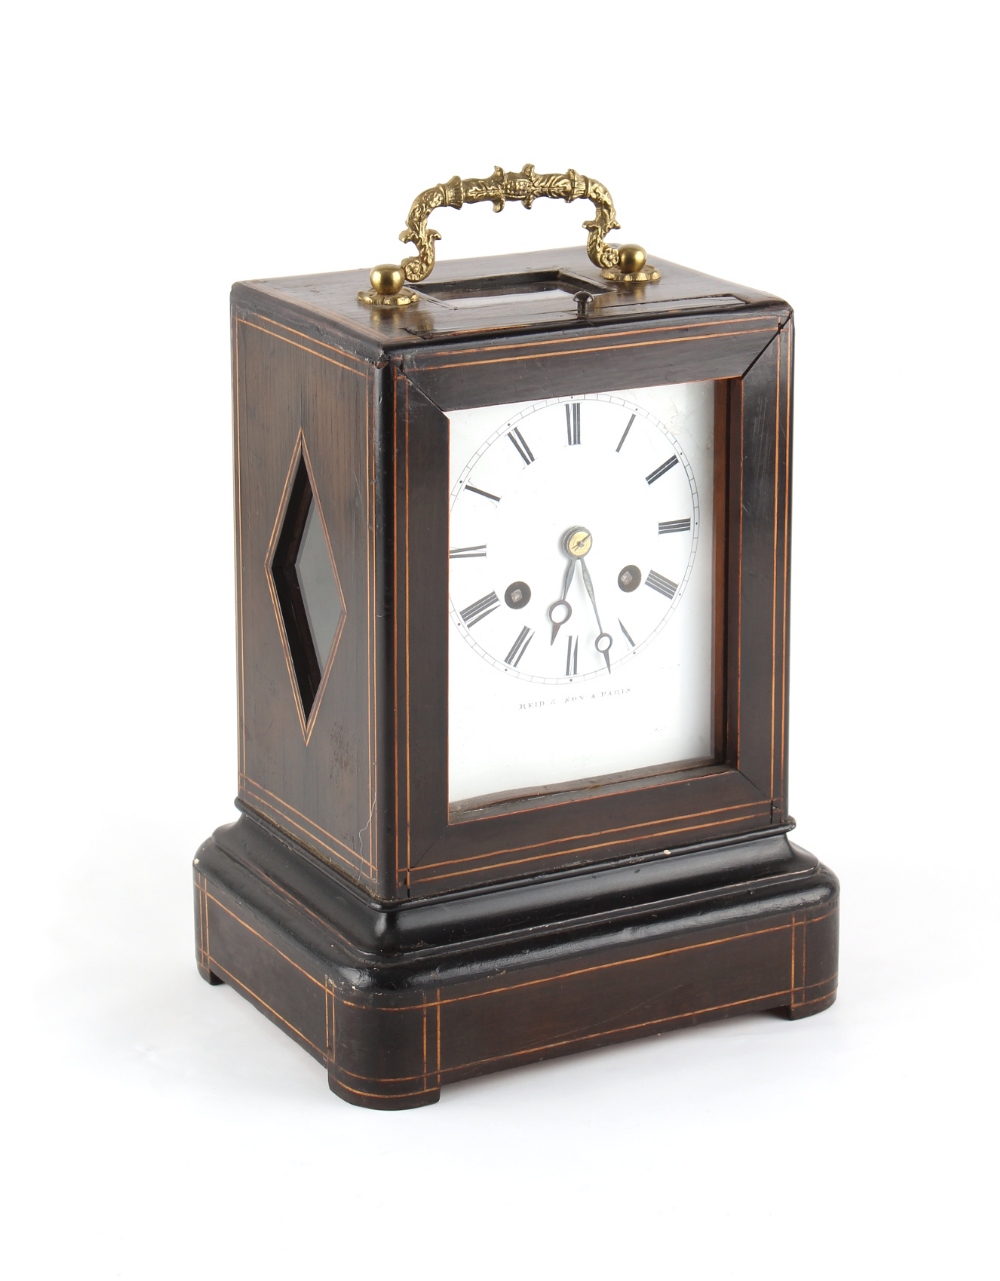 Property of a gentleman - a mid 19th century French mantel clock, the two-train movement with